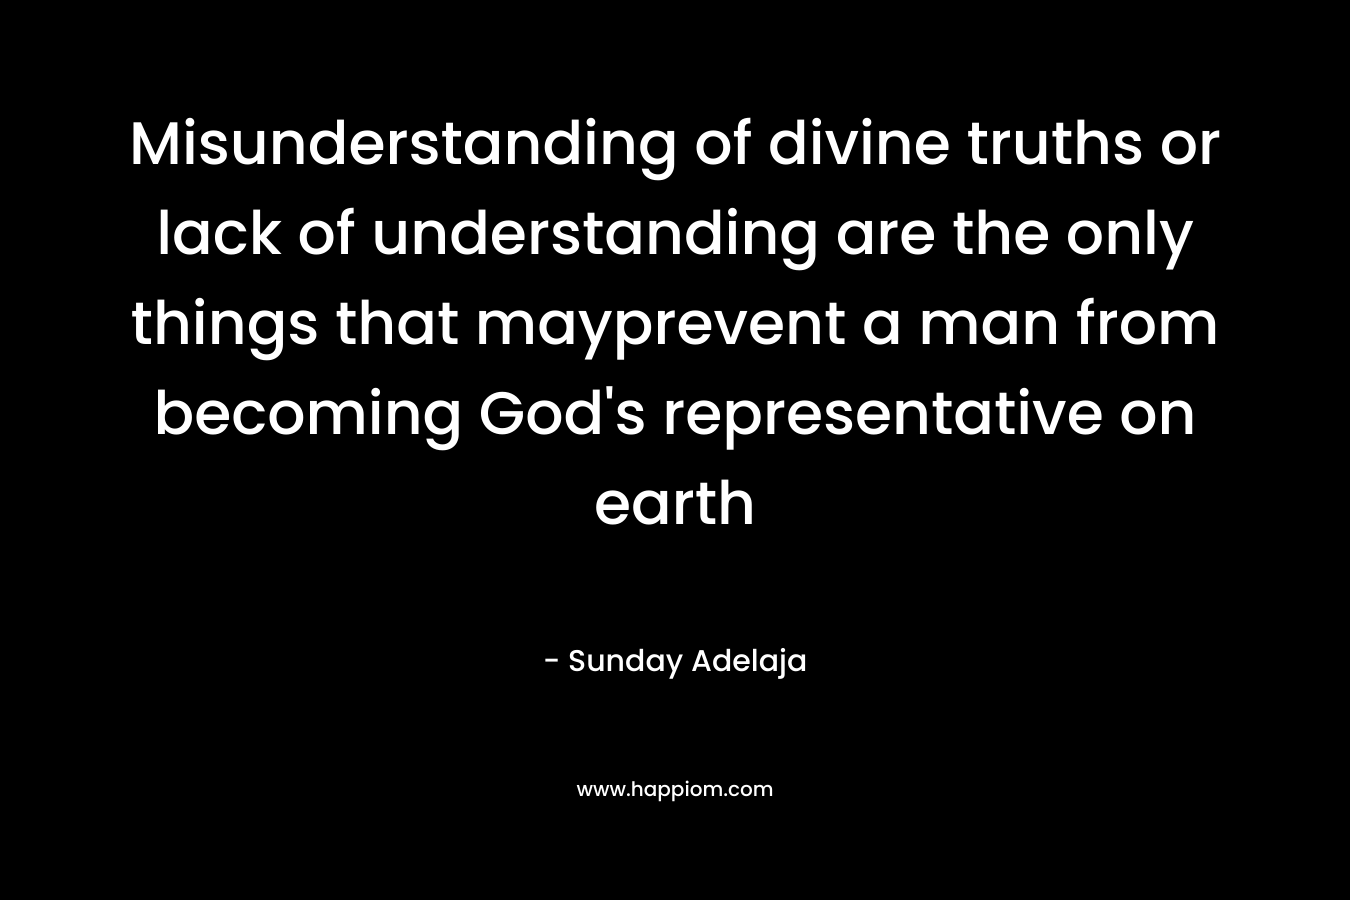 Misunderstanding of divine truths or lack of understanding are the only things that mayprevent a man from becoming God's representative on earth